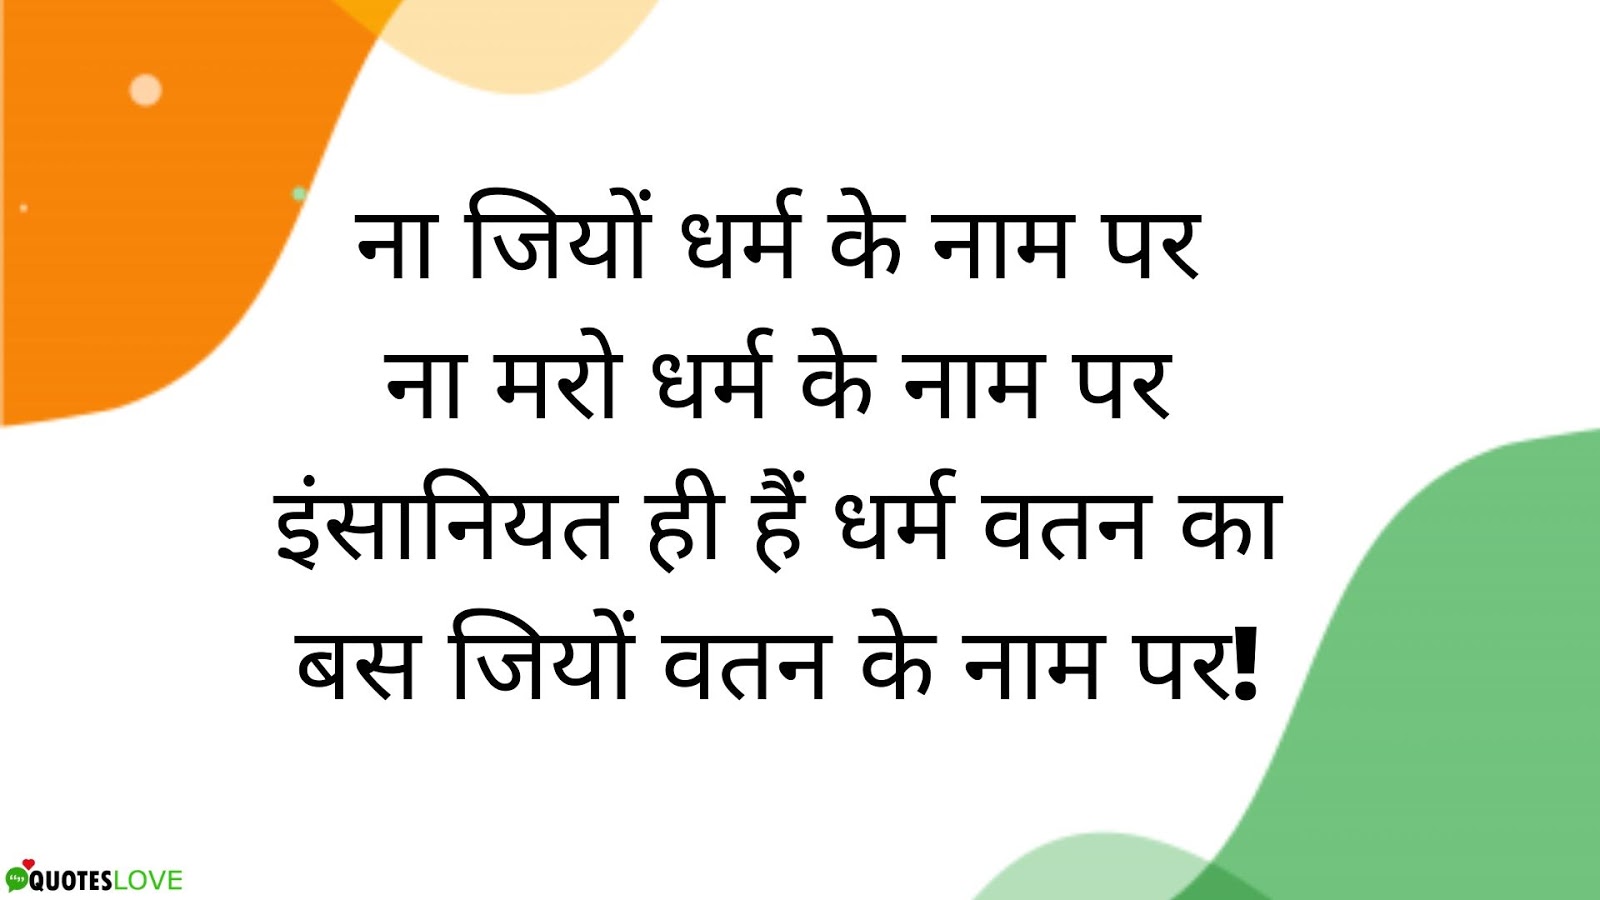 17+ (Best) Indian Republic Day Quotes In Hindi With Slogans